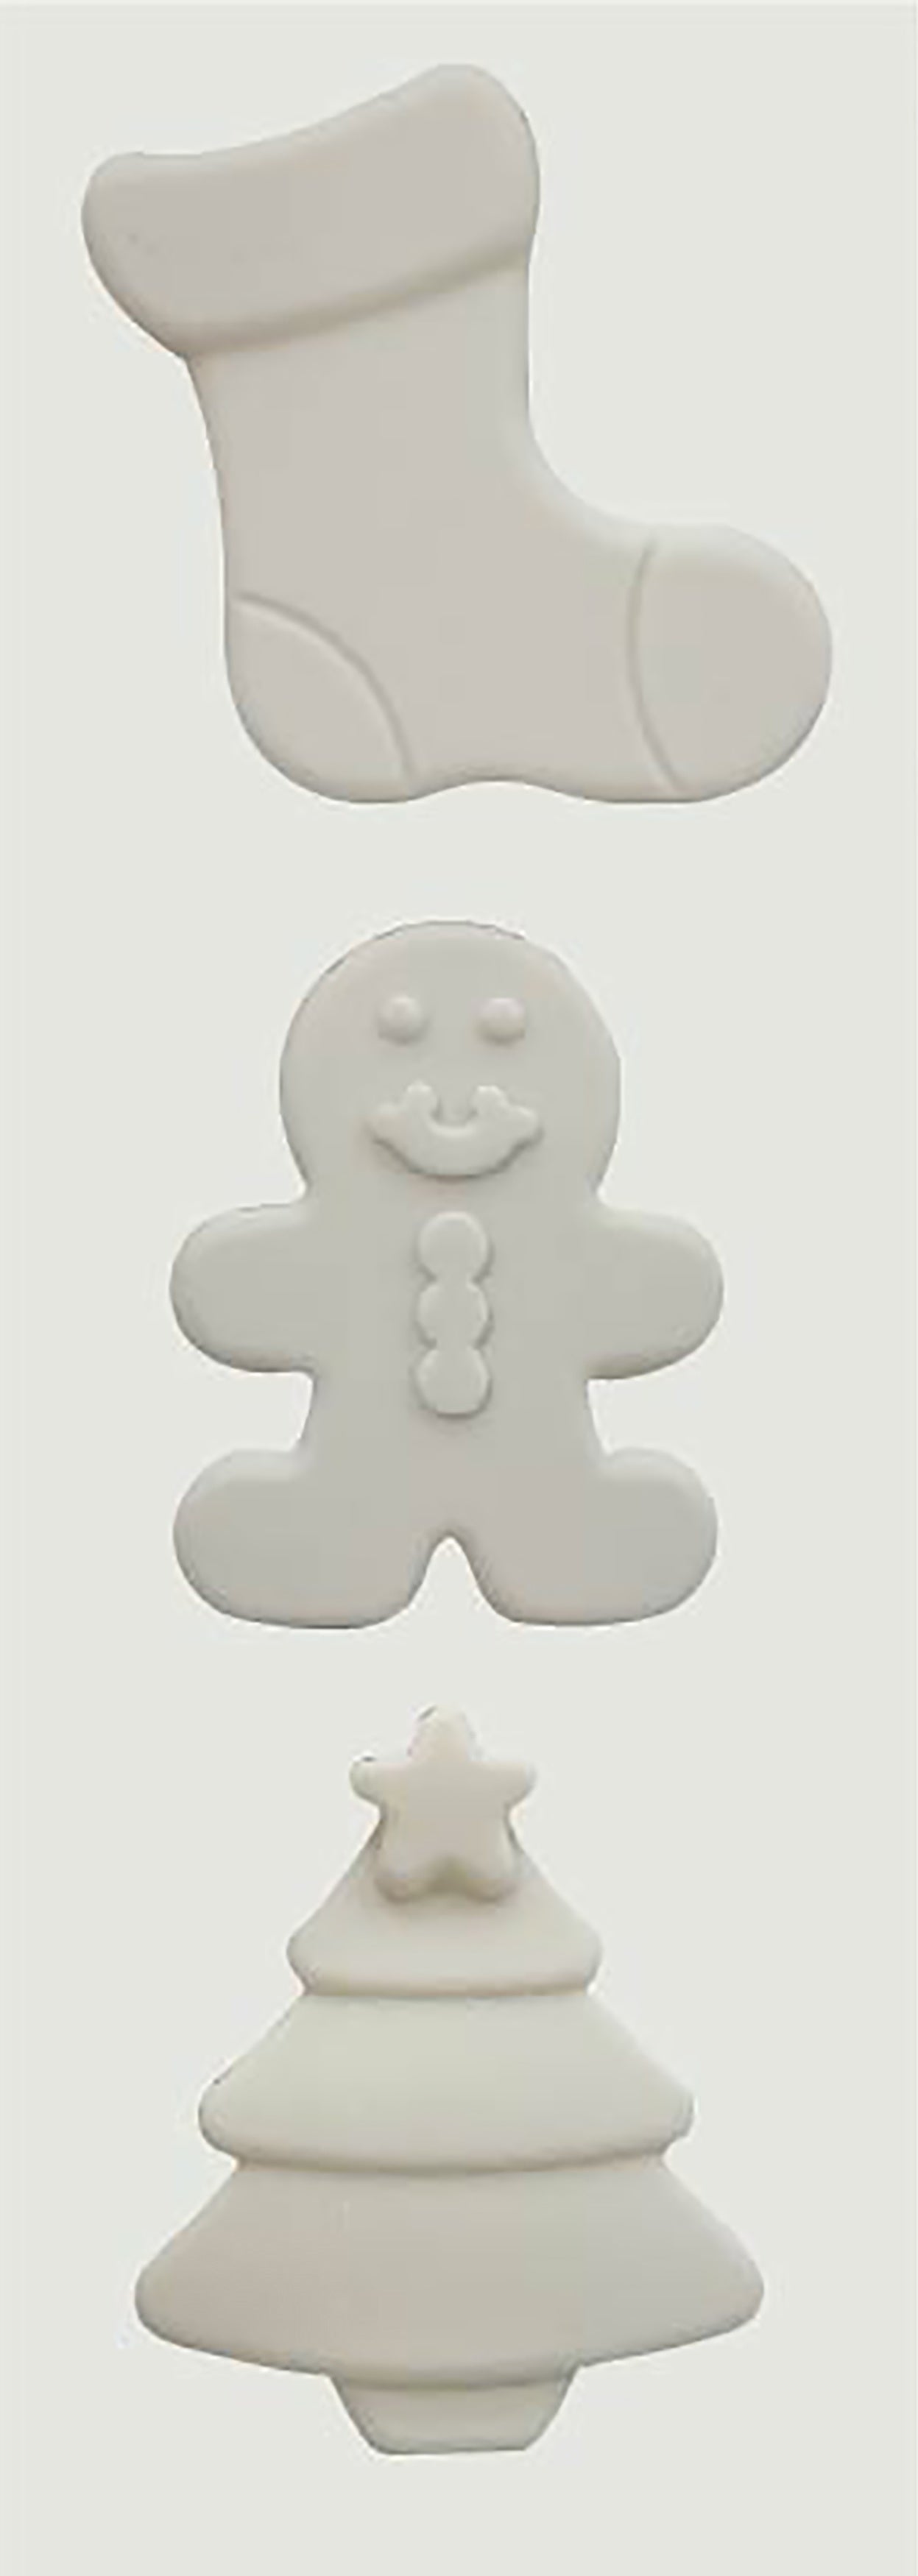 We R Memory Keepers SUDS Soap Maker Mold-Holiday